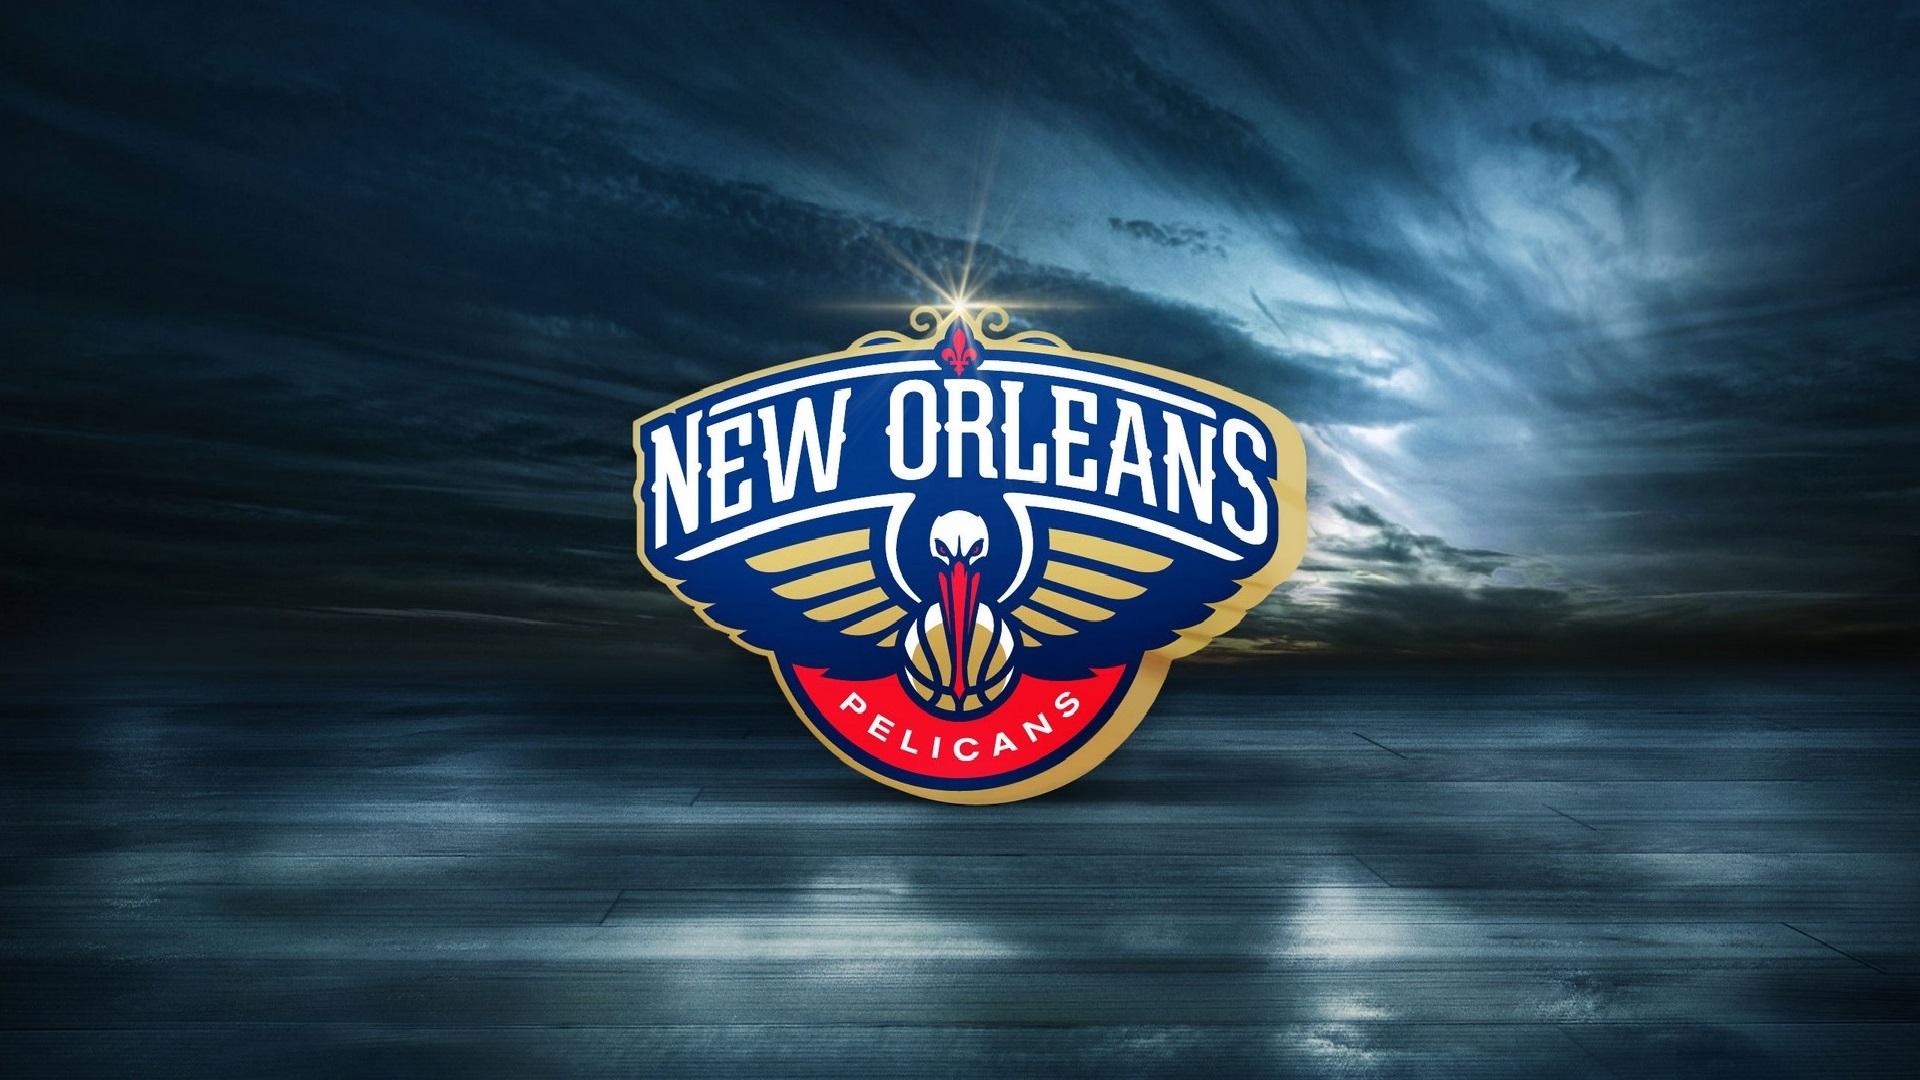 New Orleans Pelicans vs. Memphis Grizzlies Tickets, Orleans, Louisiana, United States